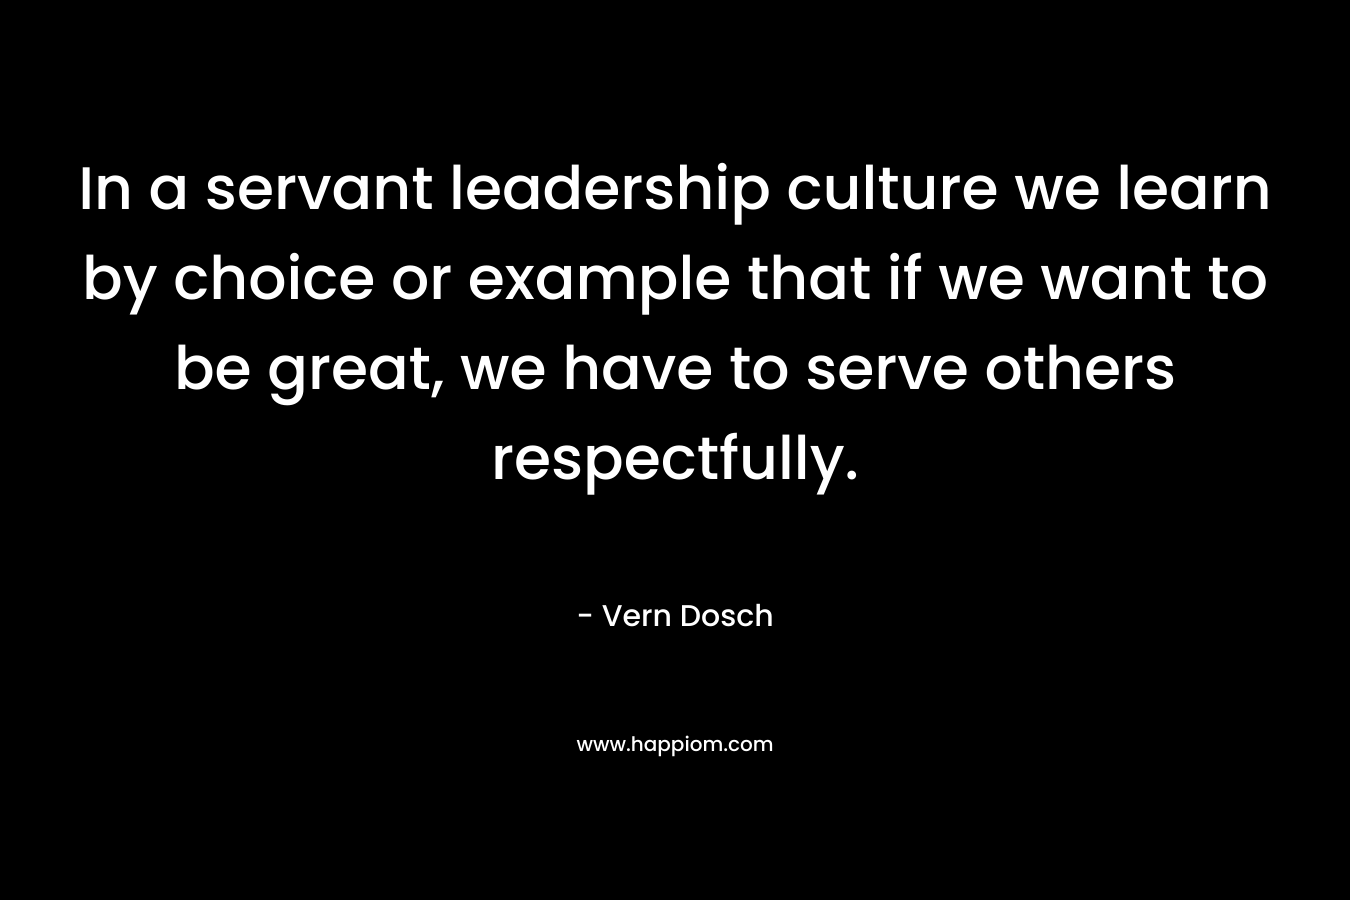 In a servant leadership culture we learn by choice or example that if we want to be great, we have to serve others respectfully.